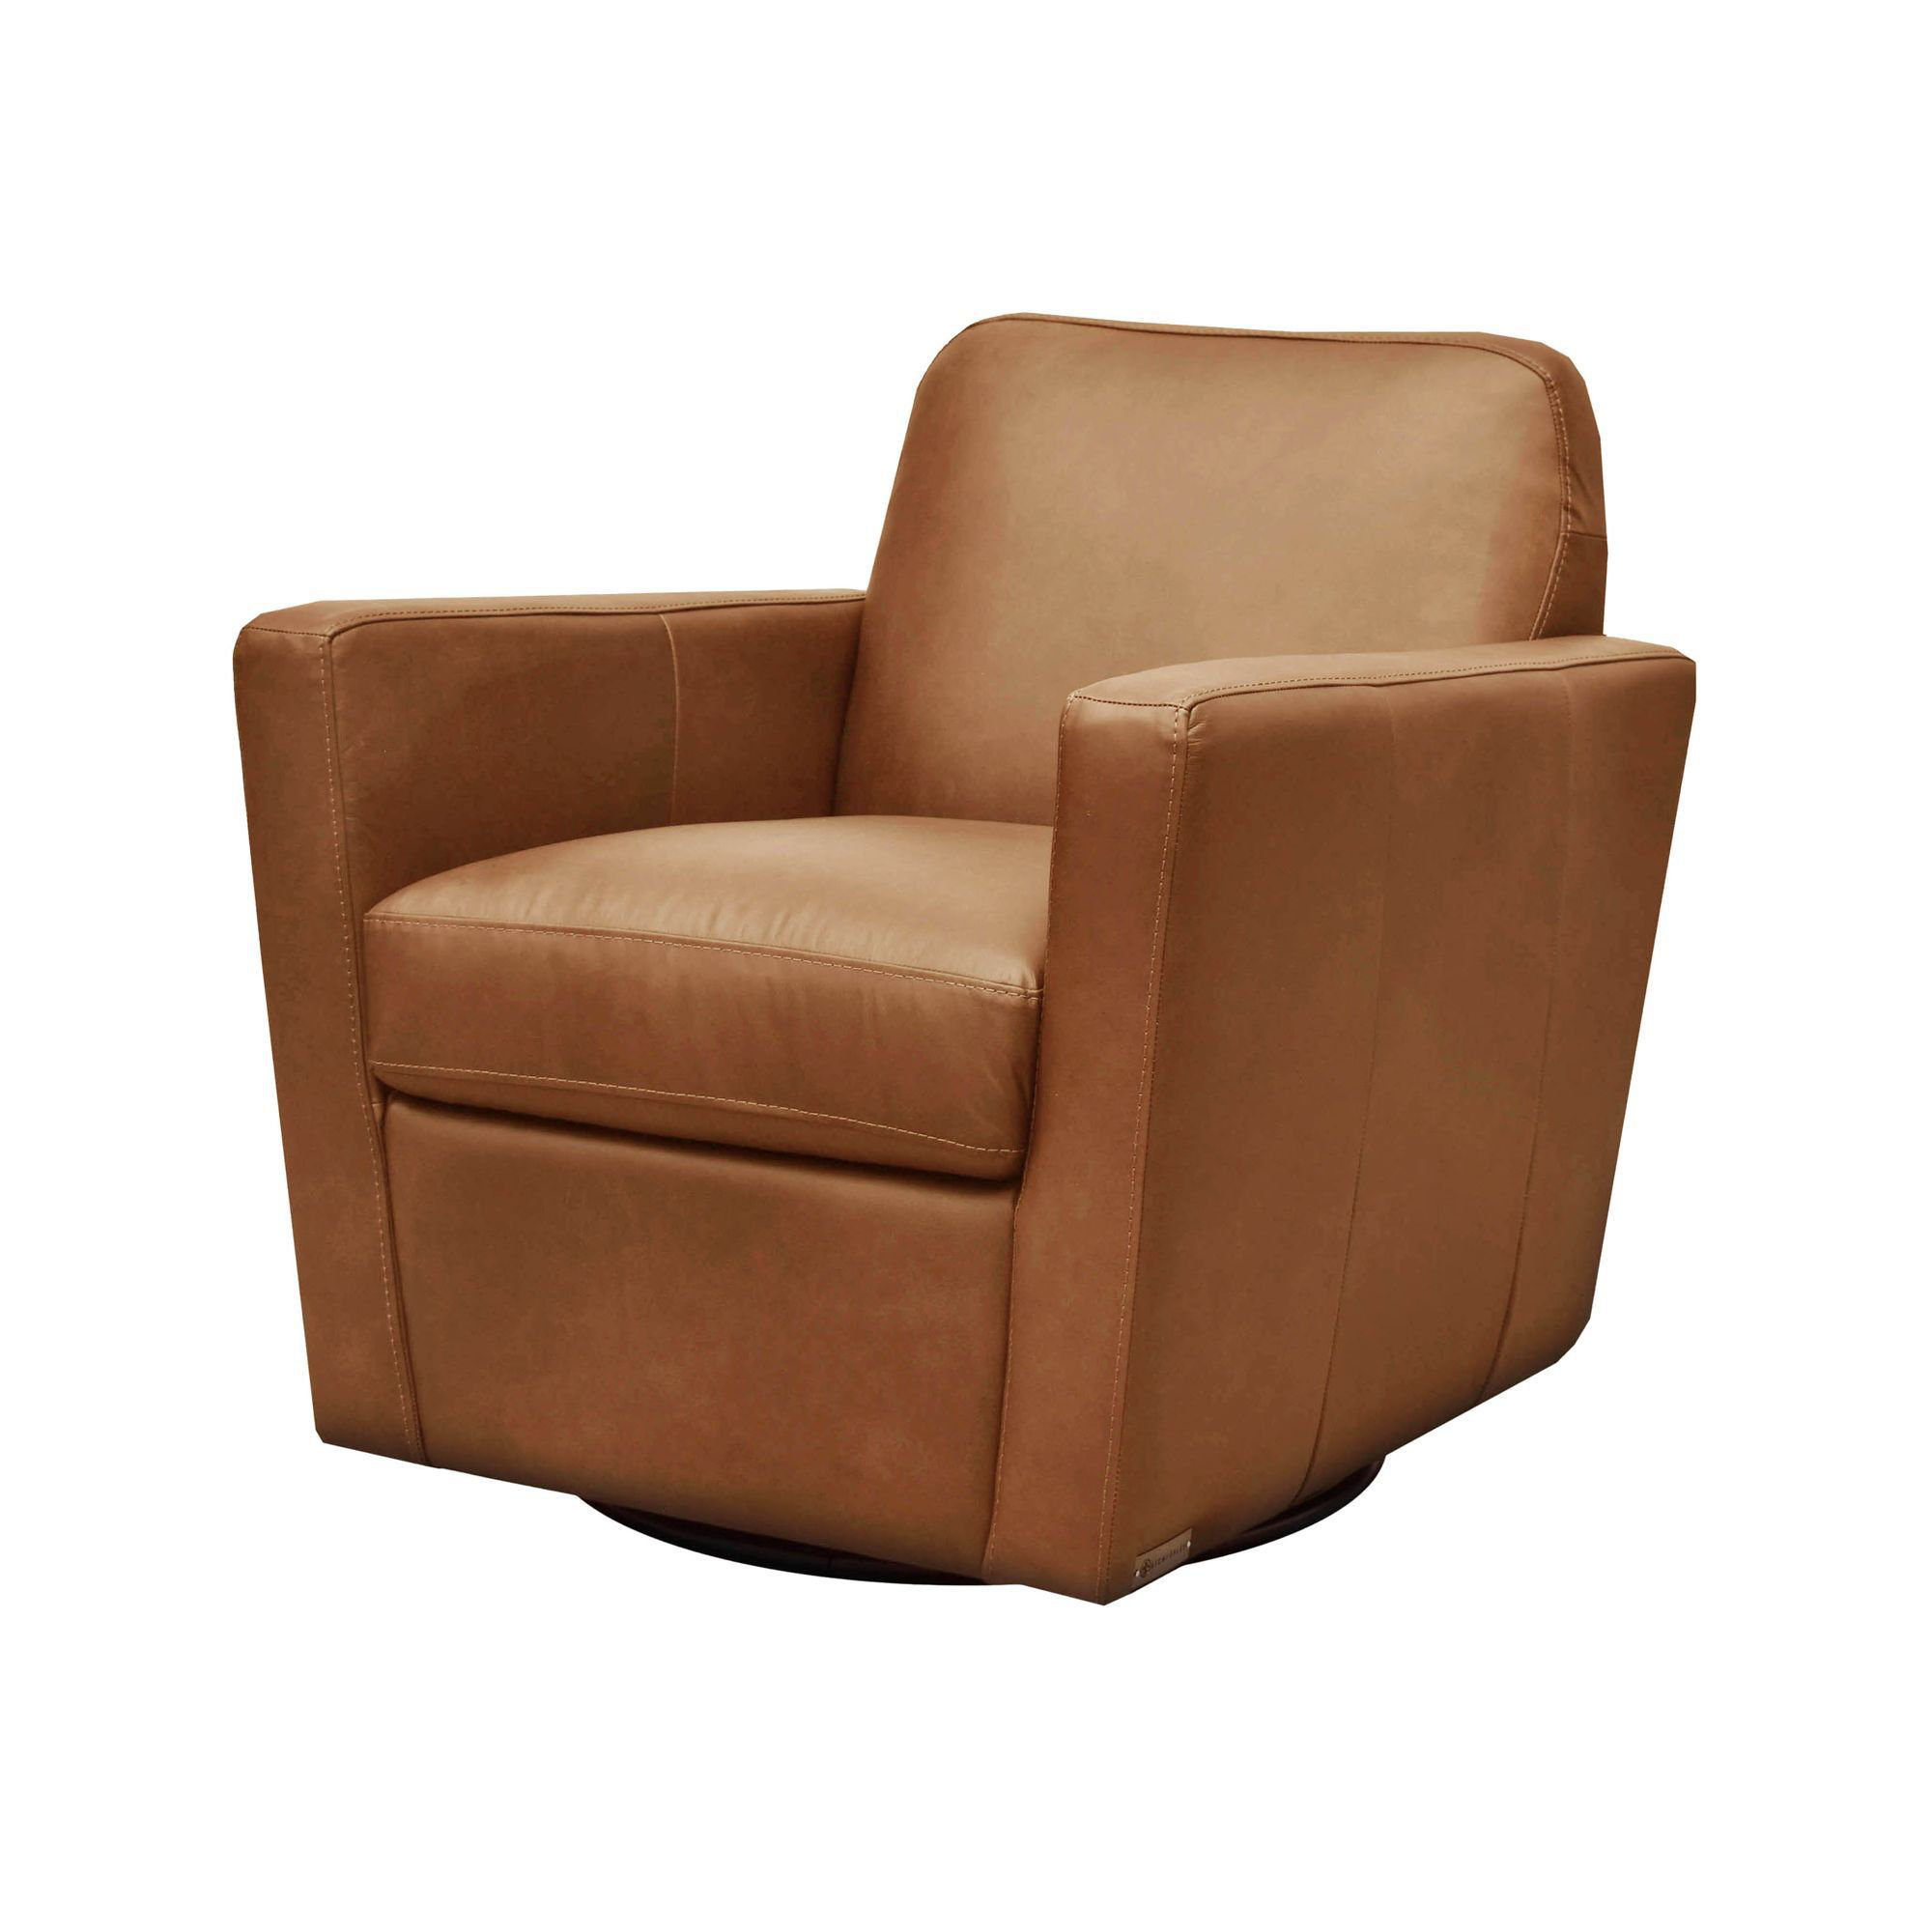 Eclectic Home Monty Leather Swivel Club Chair | Wayfair